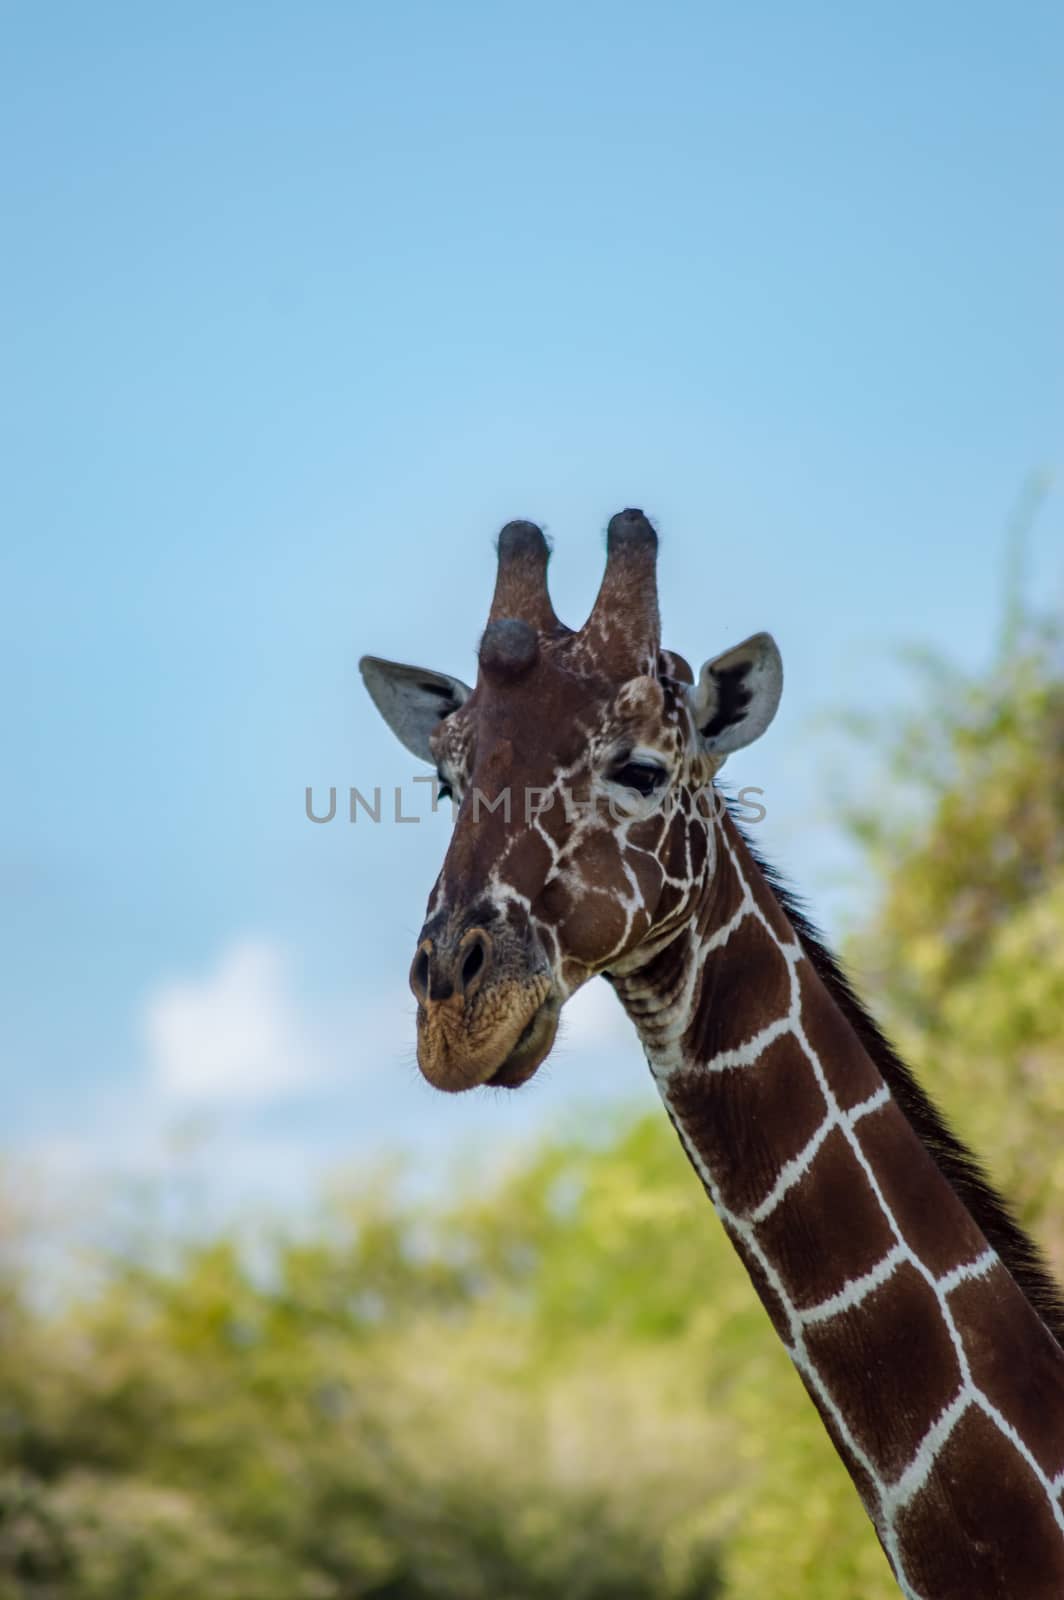 Neck and head of a giraffe  by Philou1000